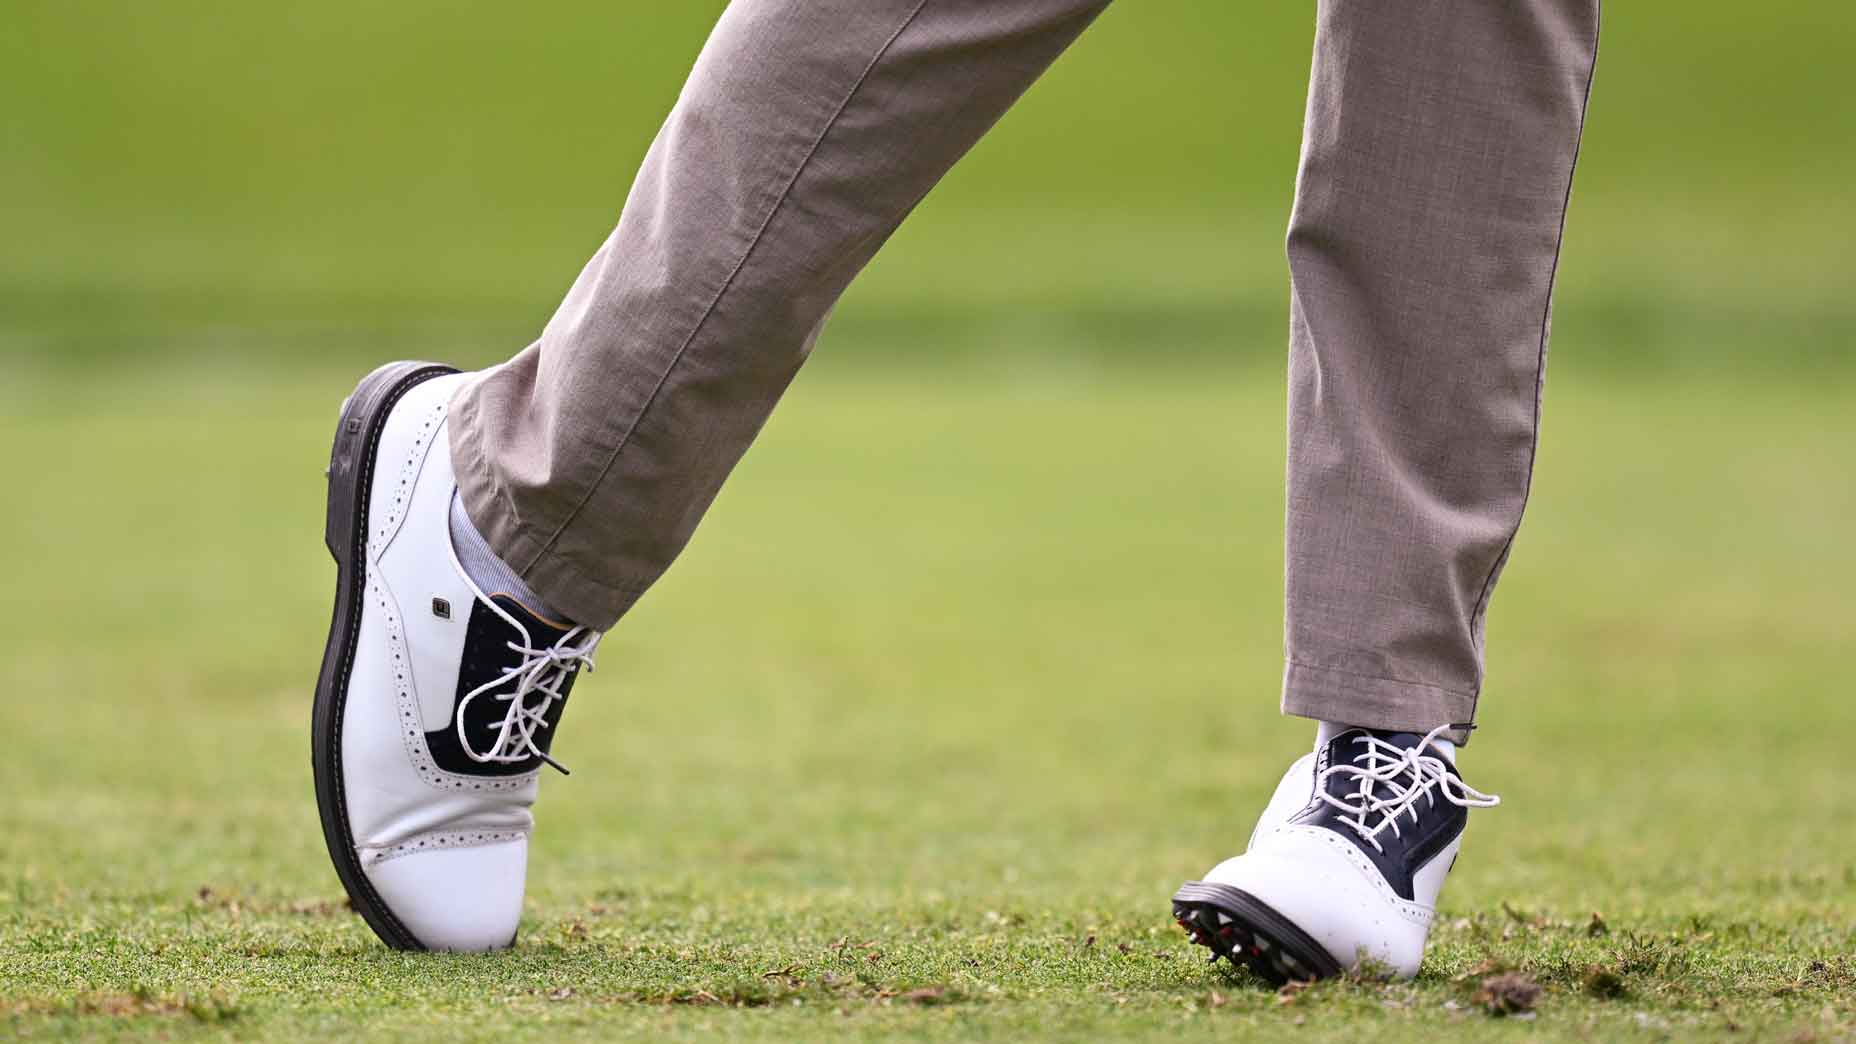 What's the proper footwork in the golf swing? Here's how it should look ...